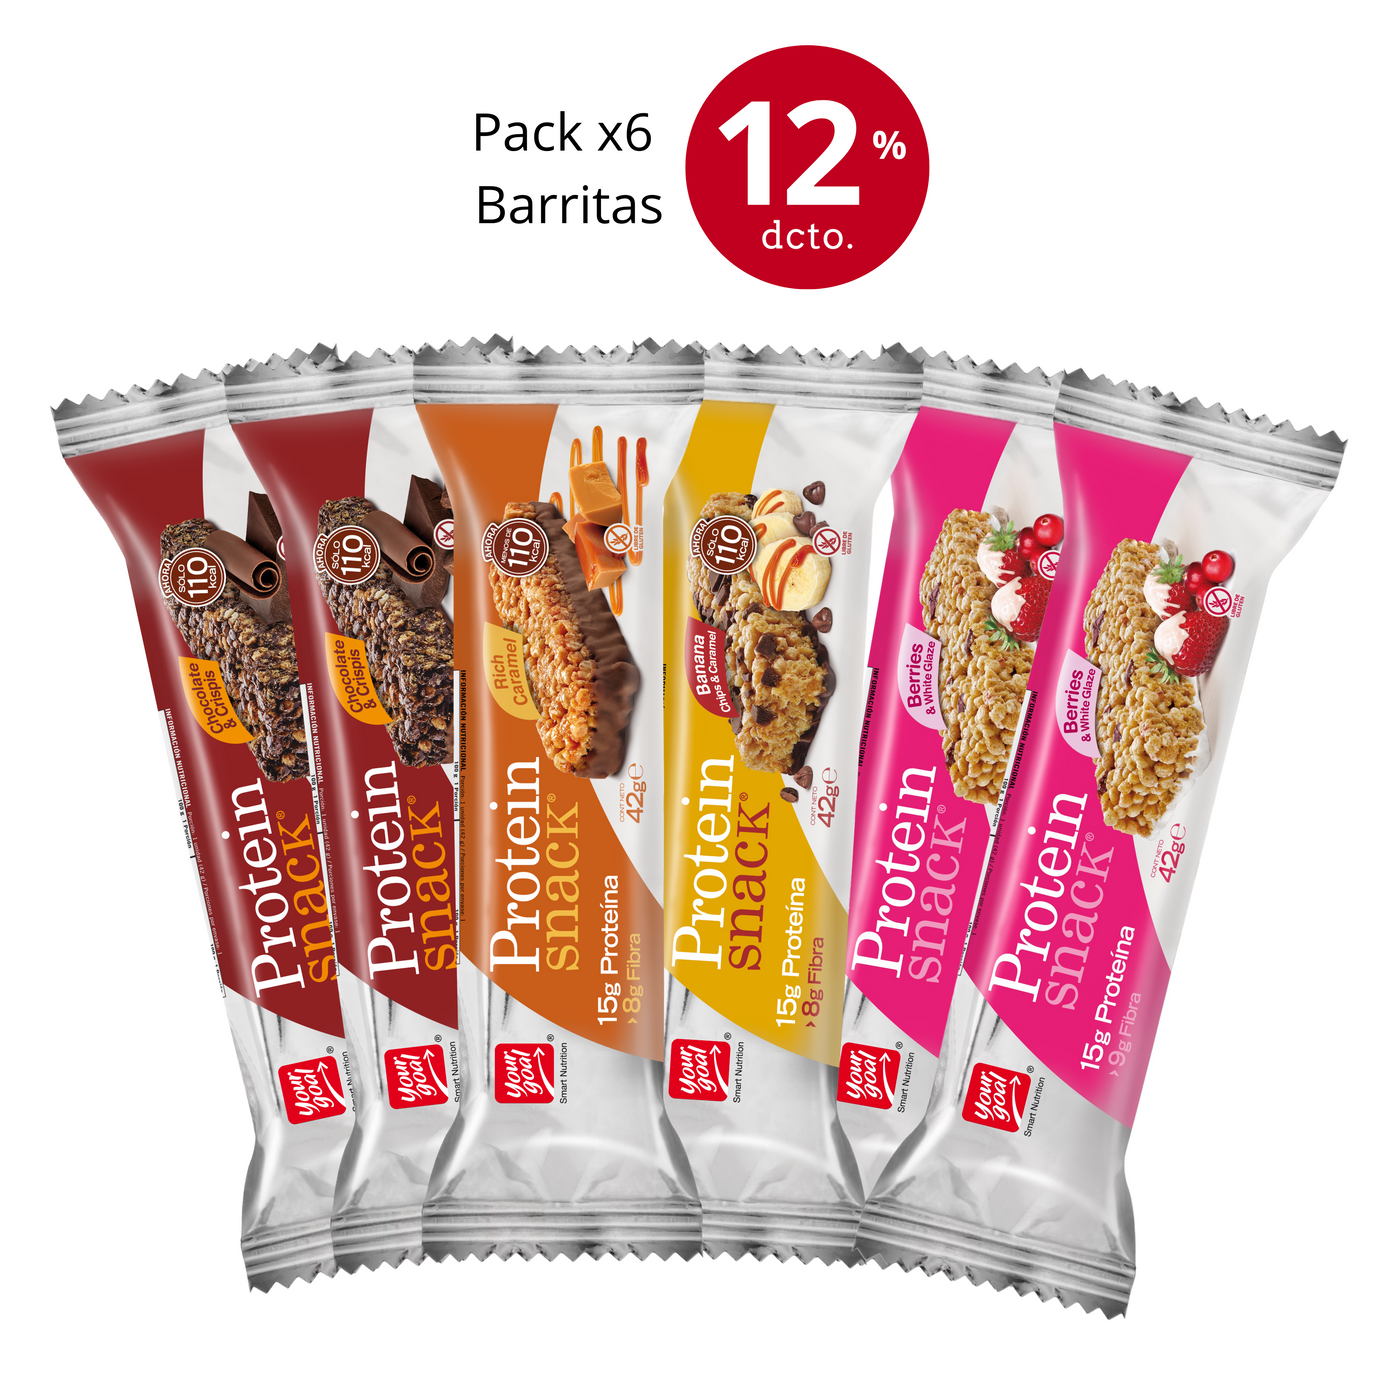 PACK X6 BARRITAS PROTEIN SNACK - VARIETY BOX